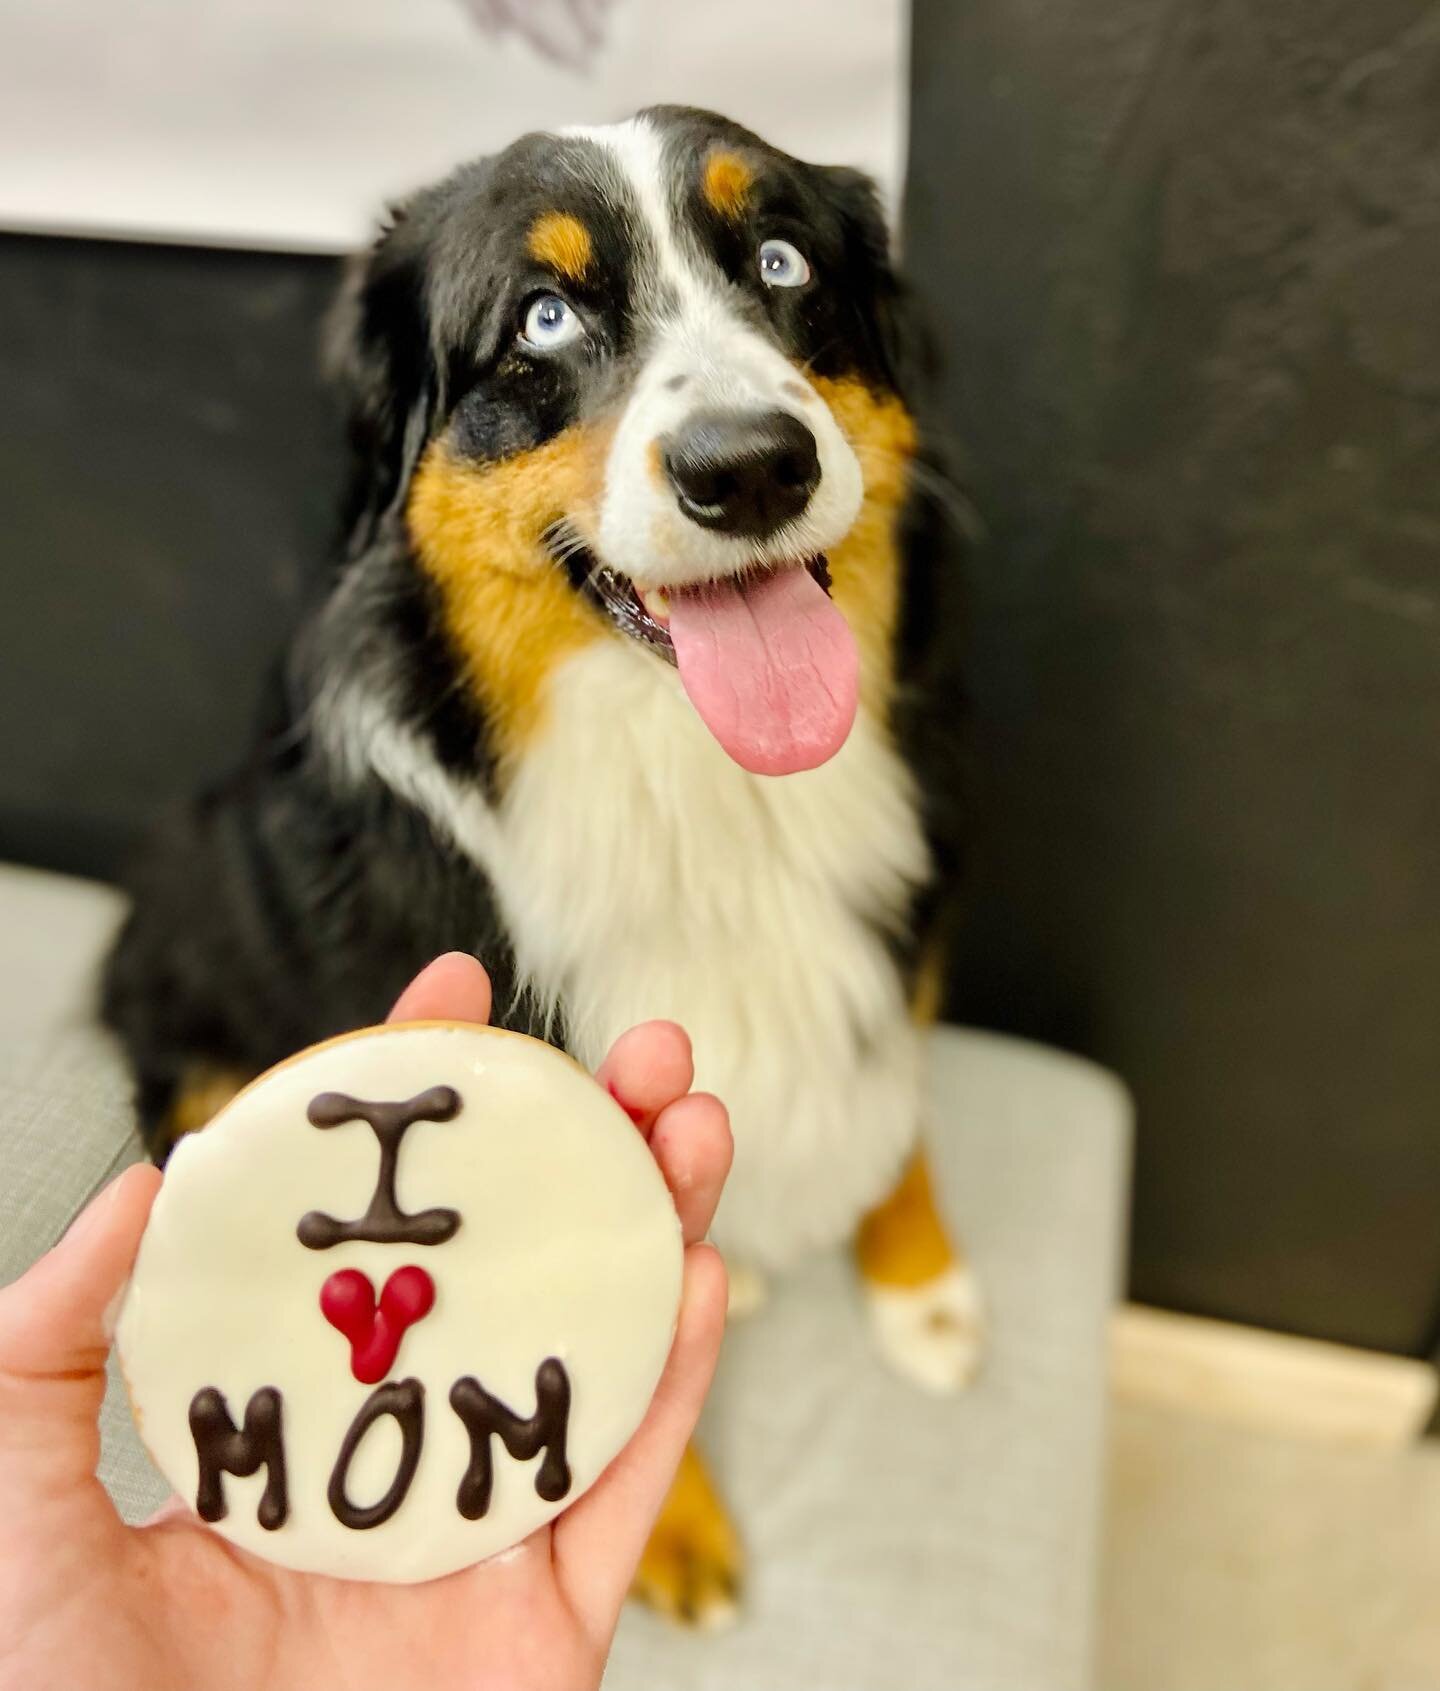 These pups LOVE their mamas! 🐶❤️

This week&rsquo;s specials for Mother&rsquo;s Day:

- $3 Mother&rsquo;s Day Treats
- 30% OFF all services 
- 50% OFF all Golden Mutt Jack retail